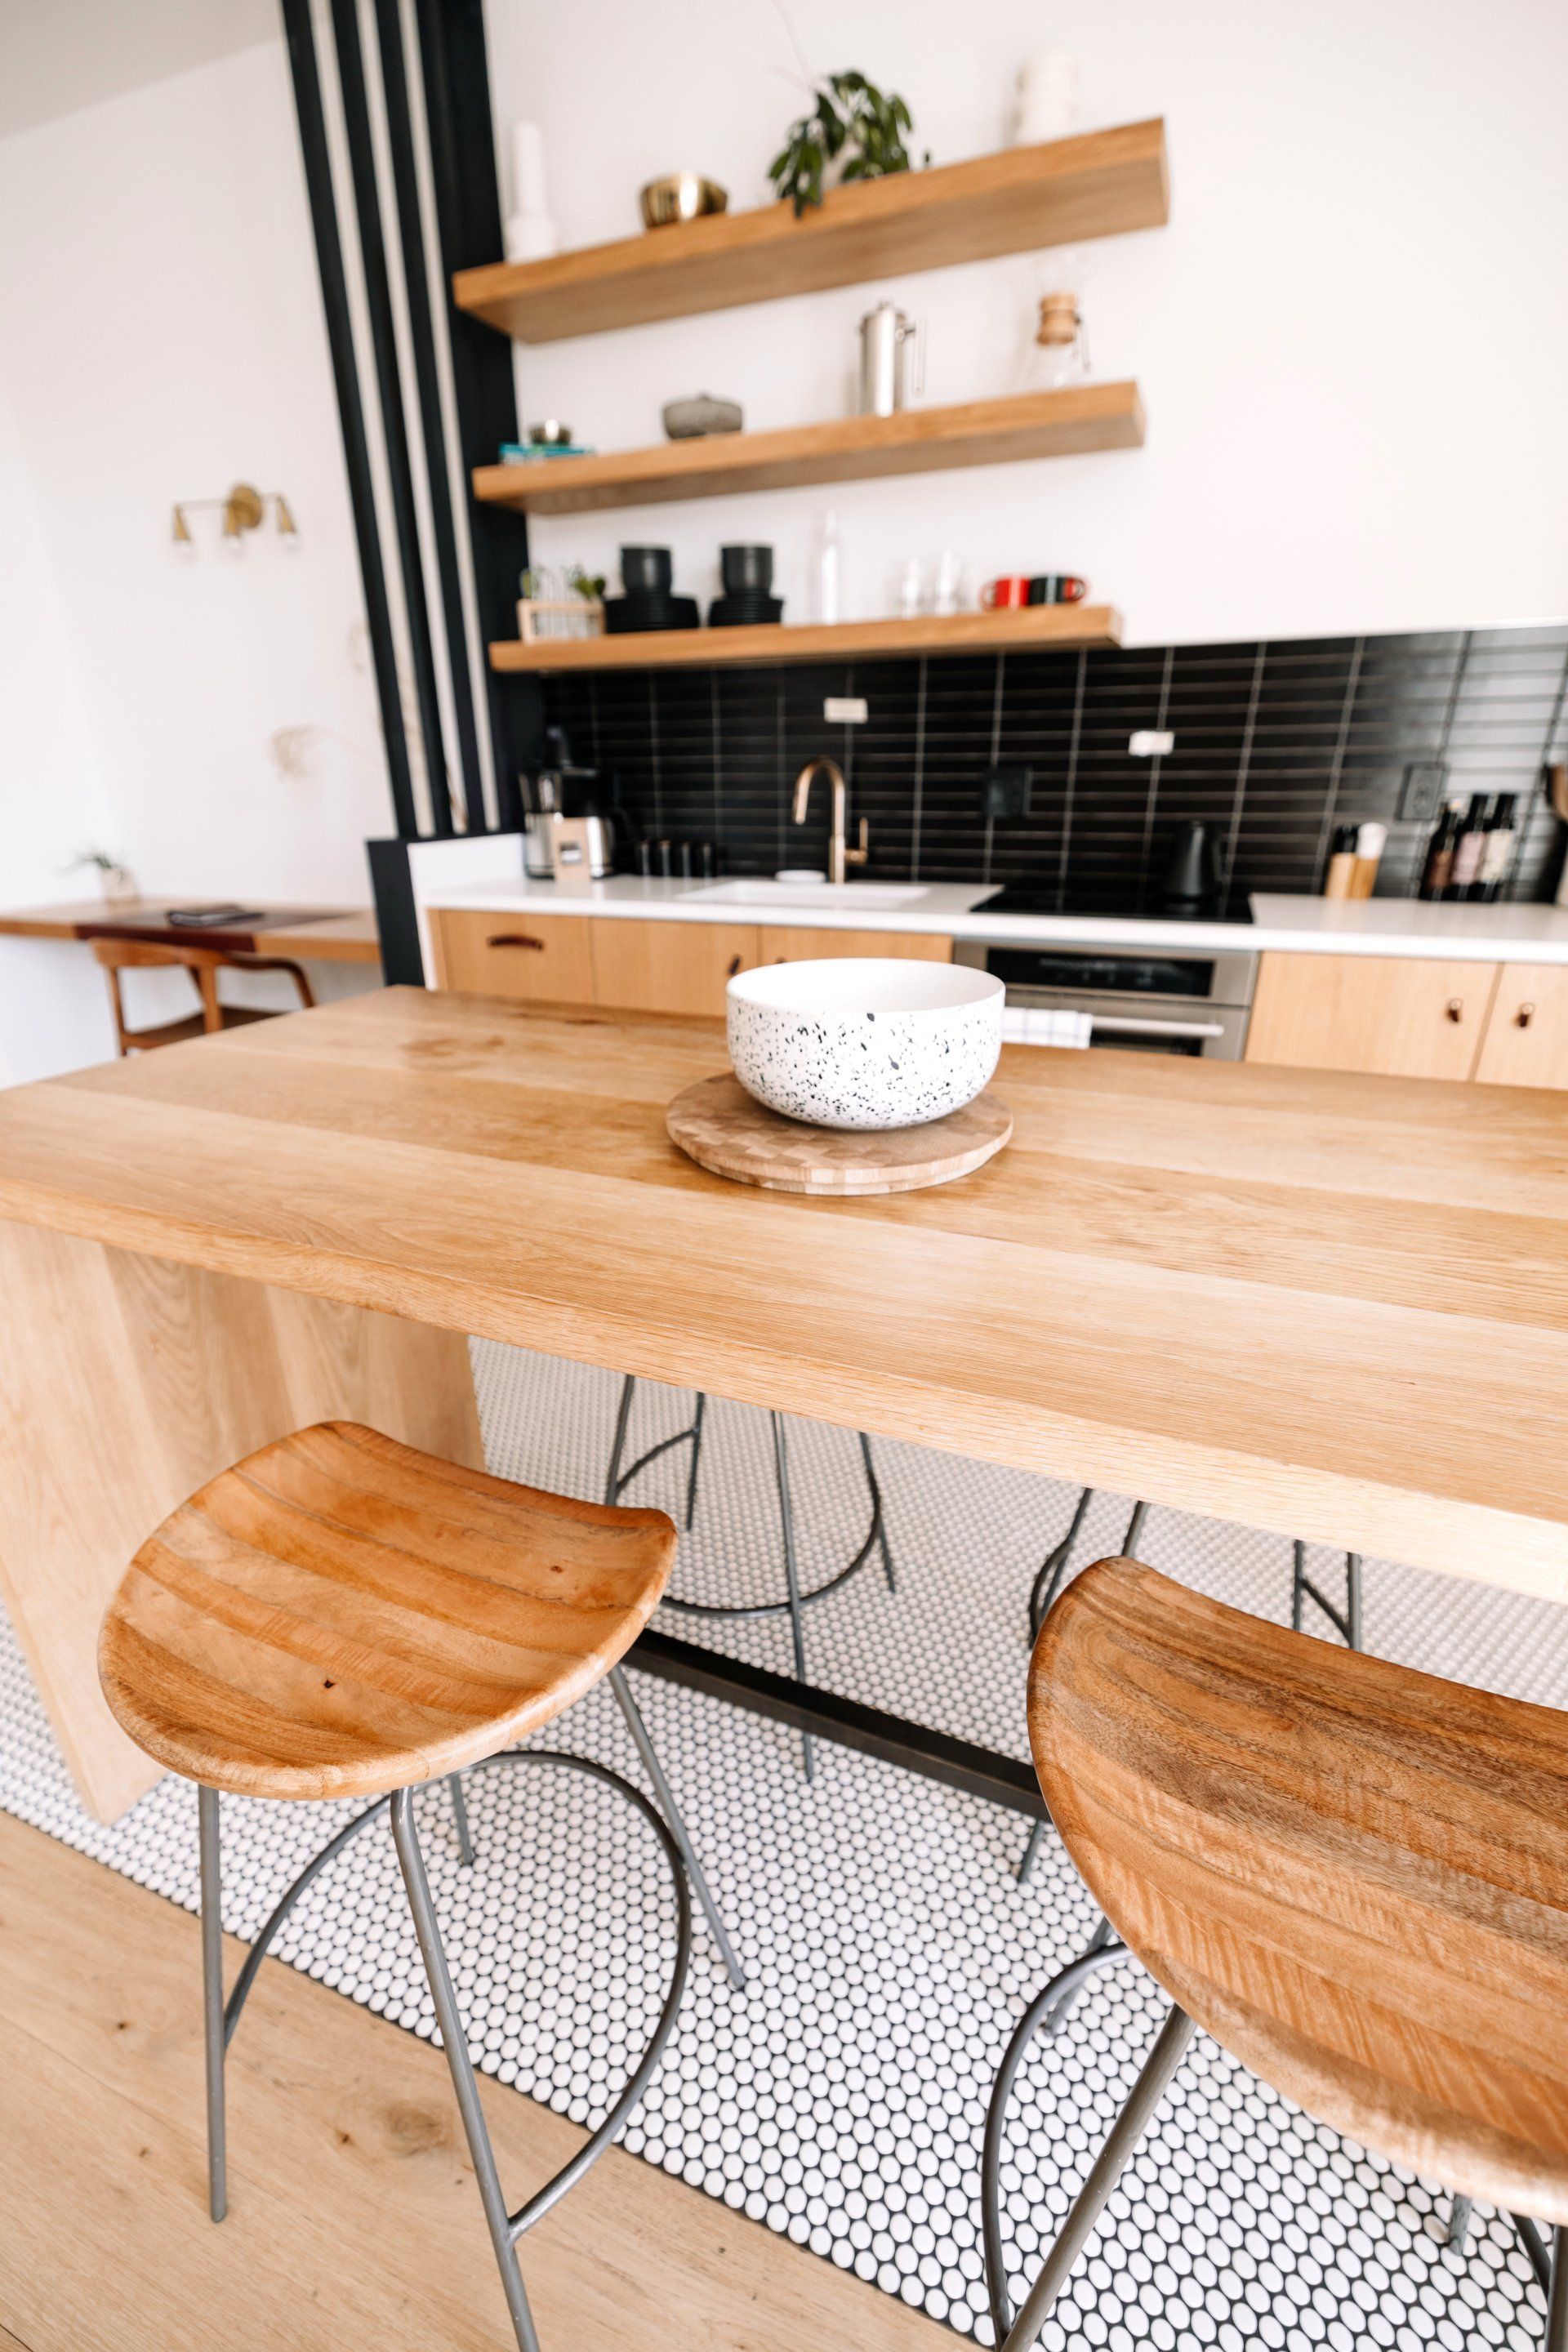 a kitchen with a wooden table and stools and a bowl on the table:  Turn Your Crowded Kitchen Into A Minimalist Space